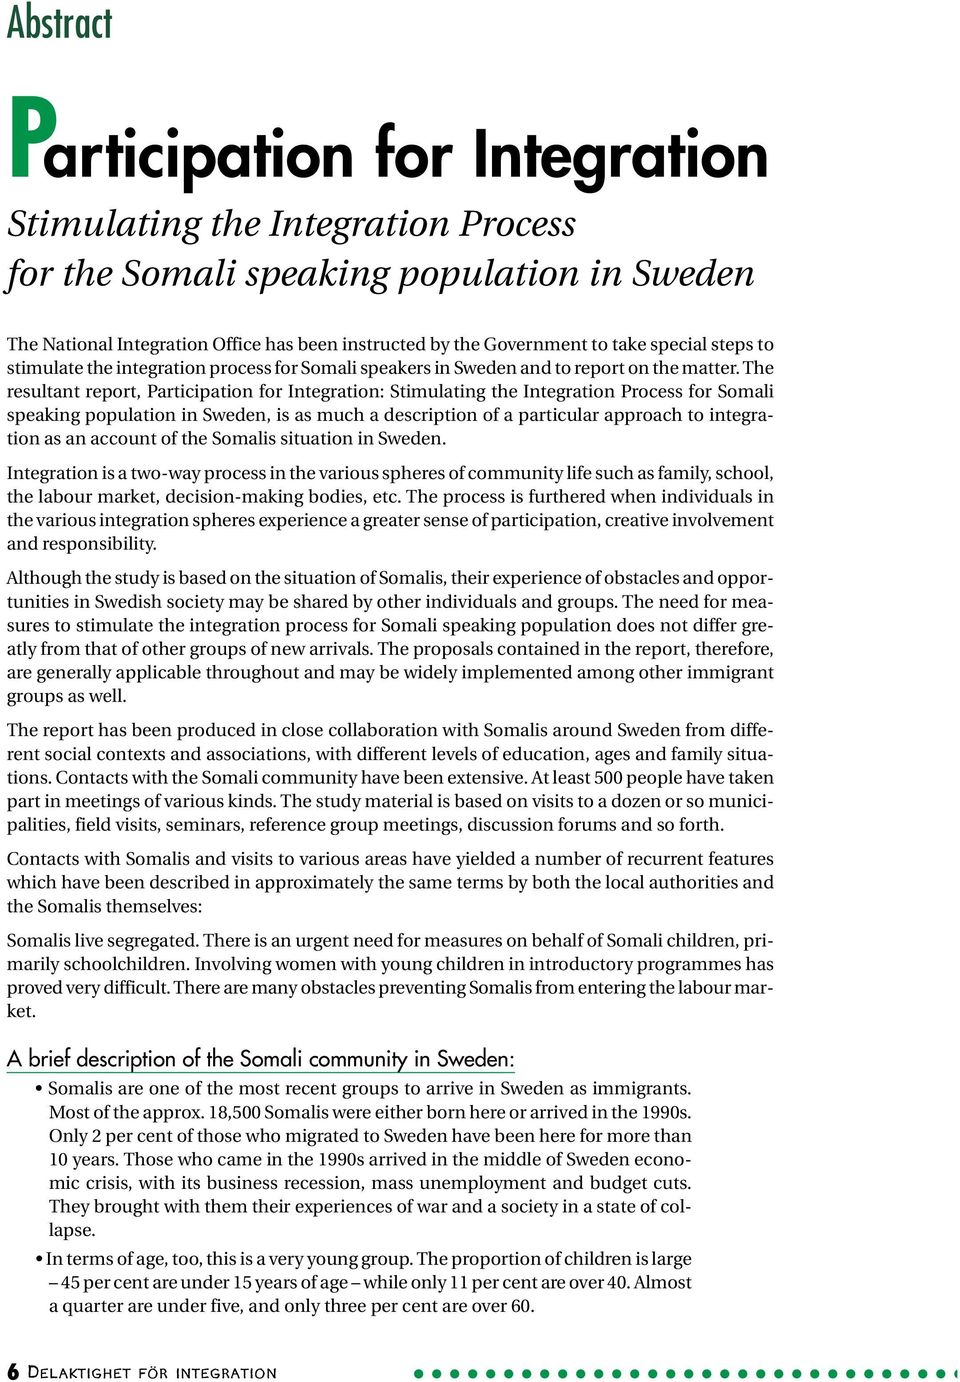 The resultant report, Participation for Integration: Stimulating the Integration Process for Somali speaking population in Sweden, is as much a description of a particular approach to integration as